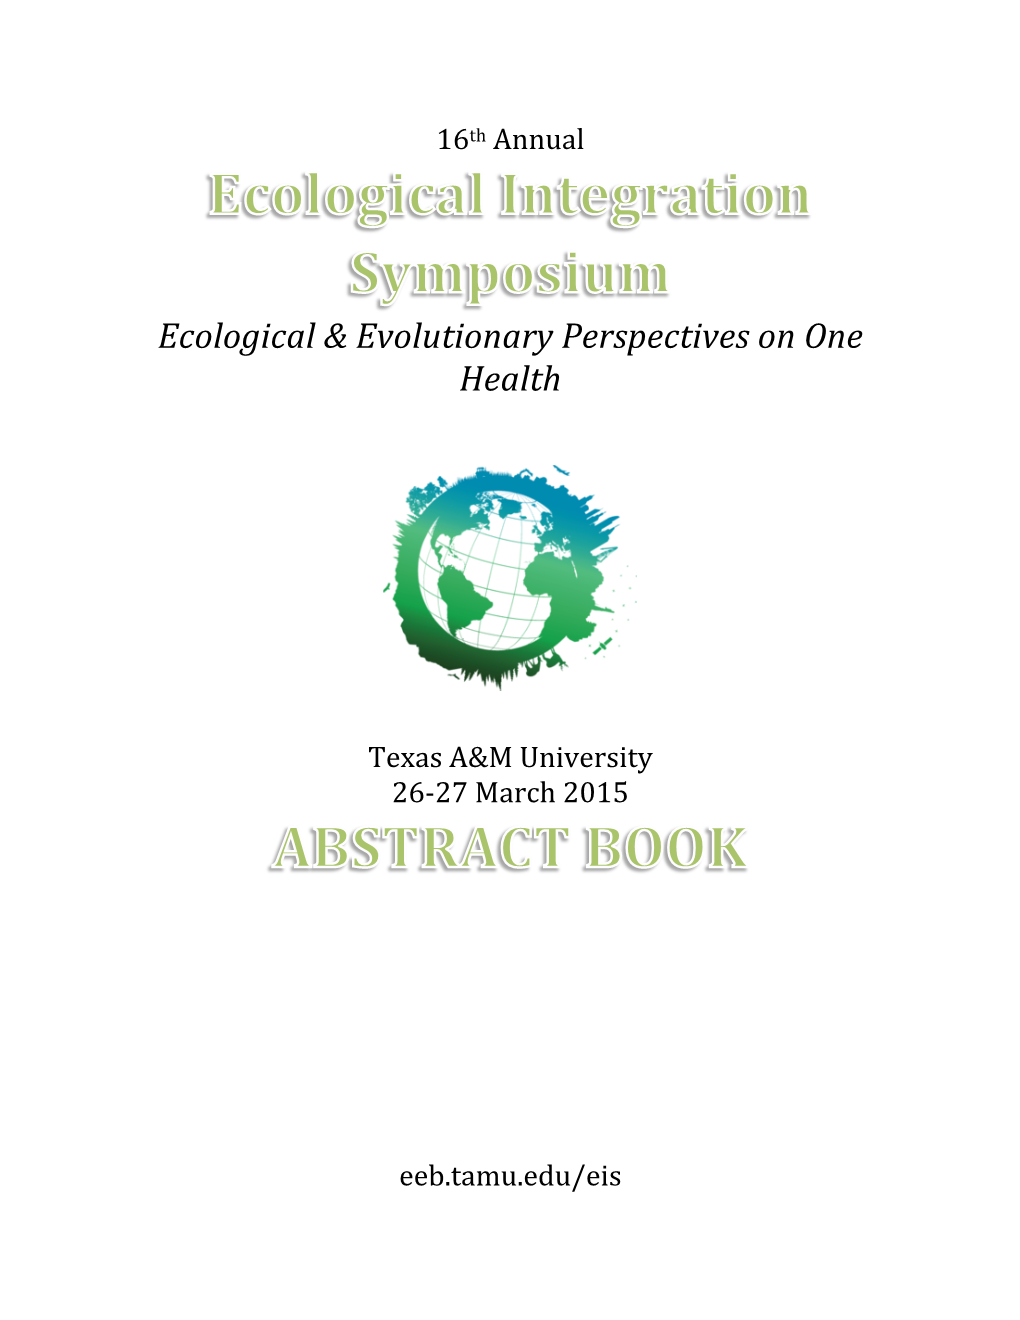 Ecological & Evolutionary Perspectives on One Health